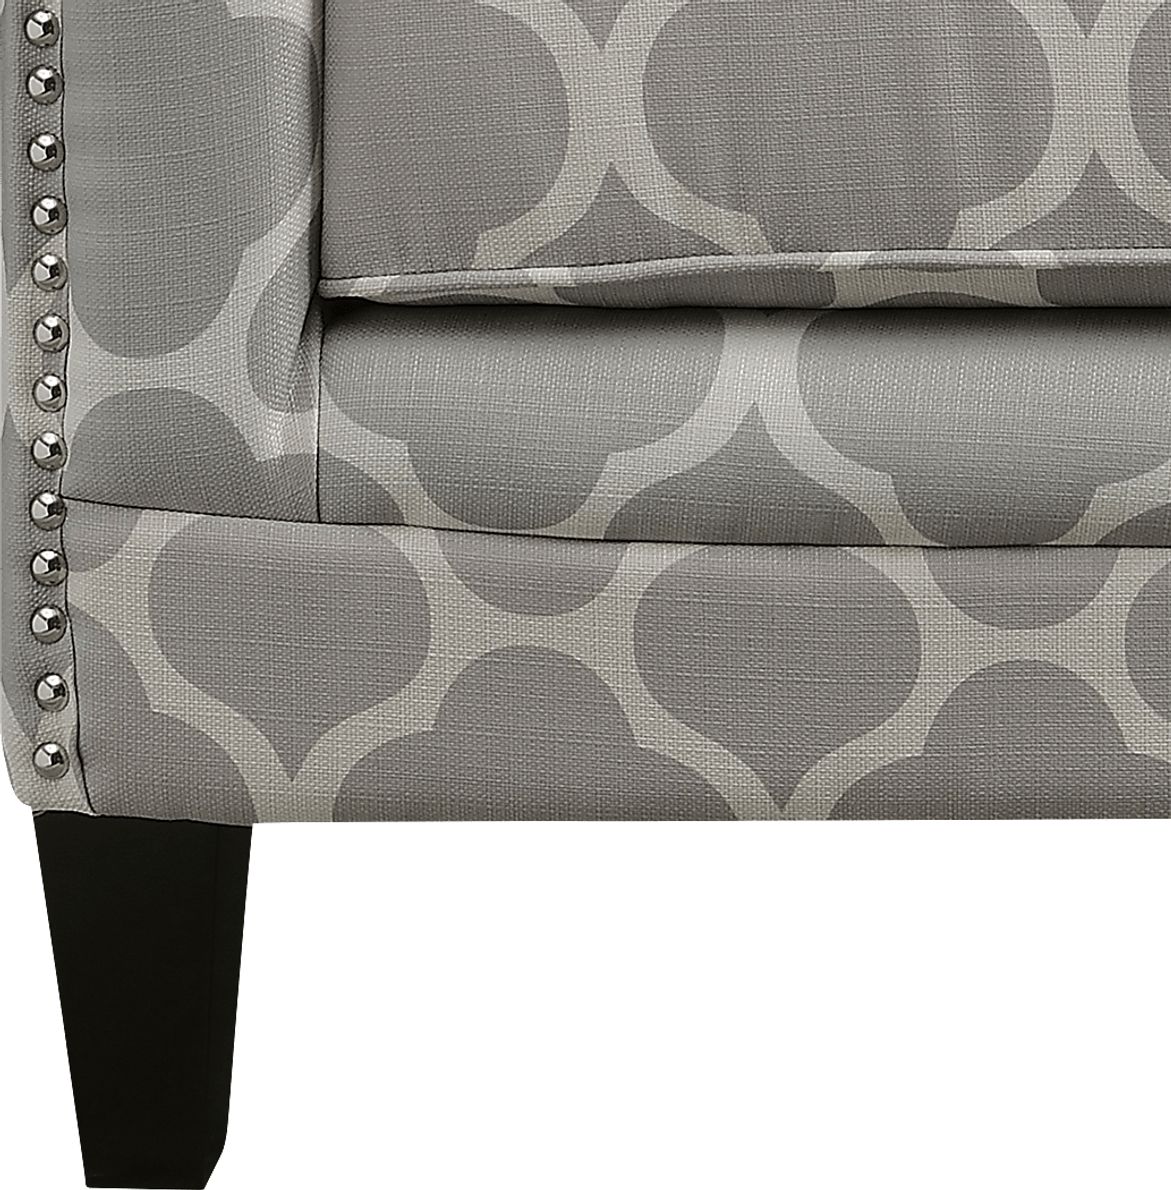 Weona I Accent Chair